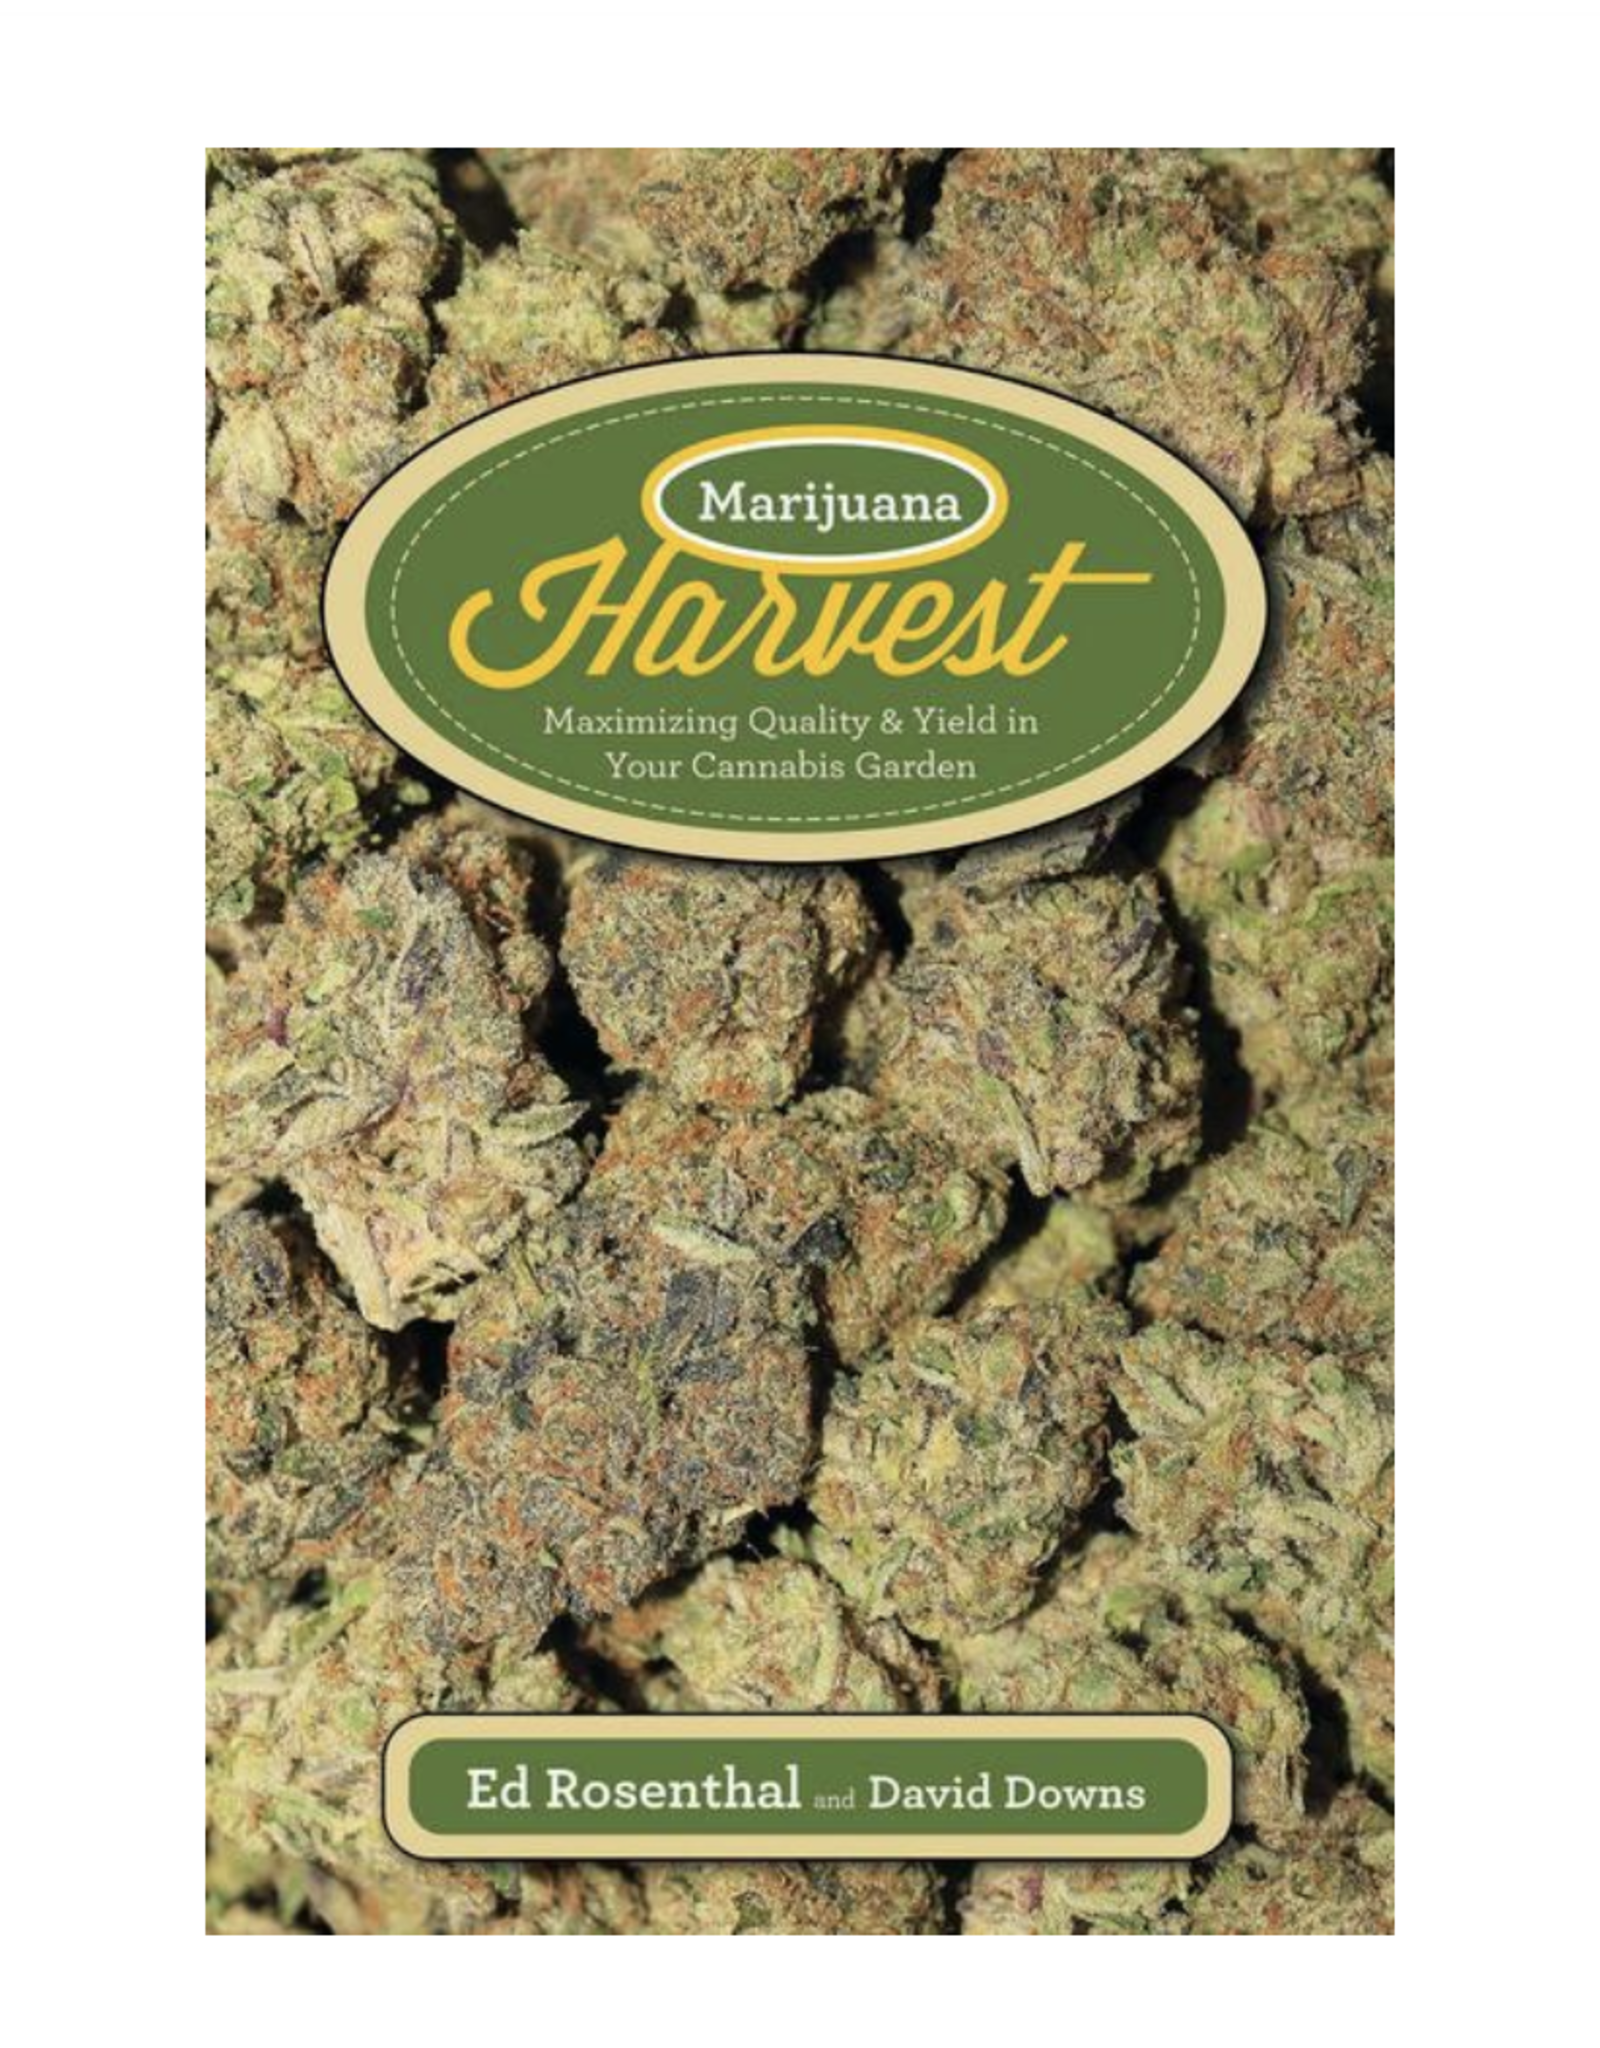 Marijuana Harvest: Maximizing Quality & Yield in Your Cannabis Garden by Ed Rosenthal